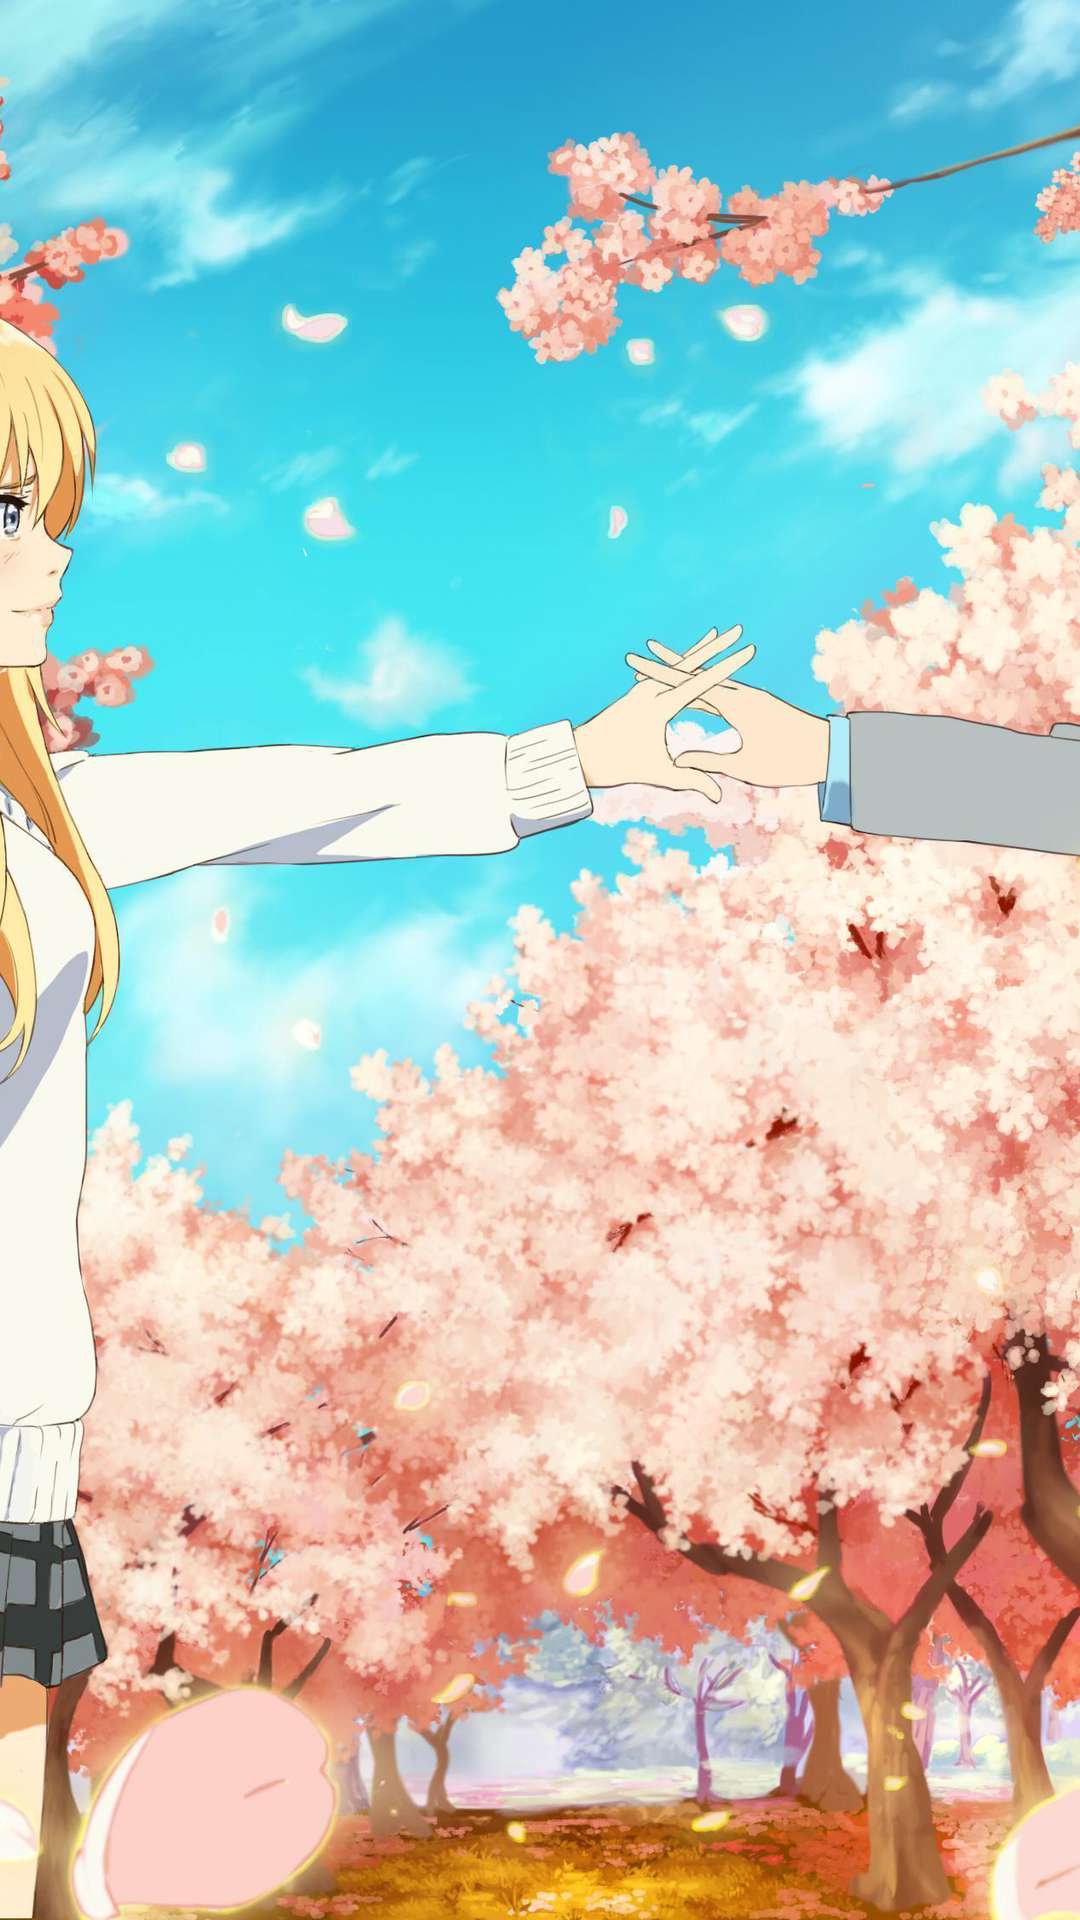 Your Lie In April Iphone Wallpapers